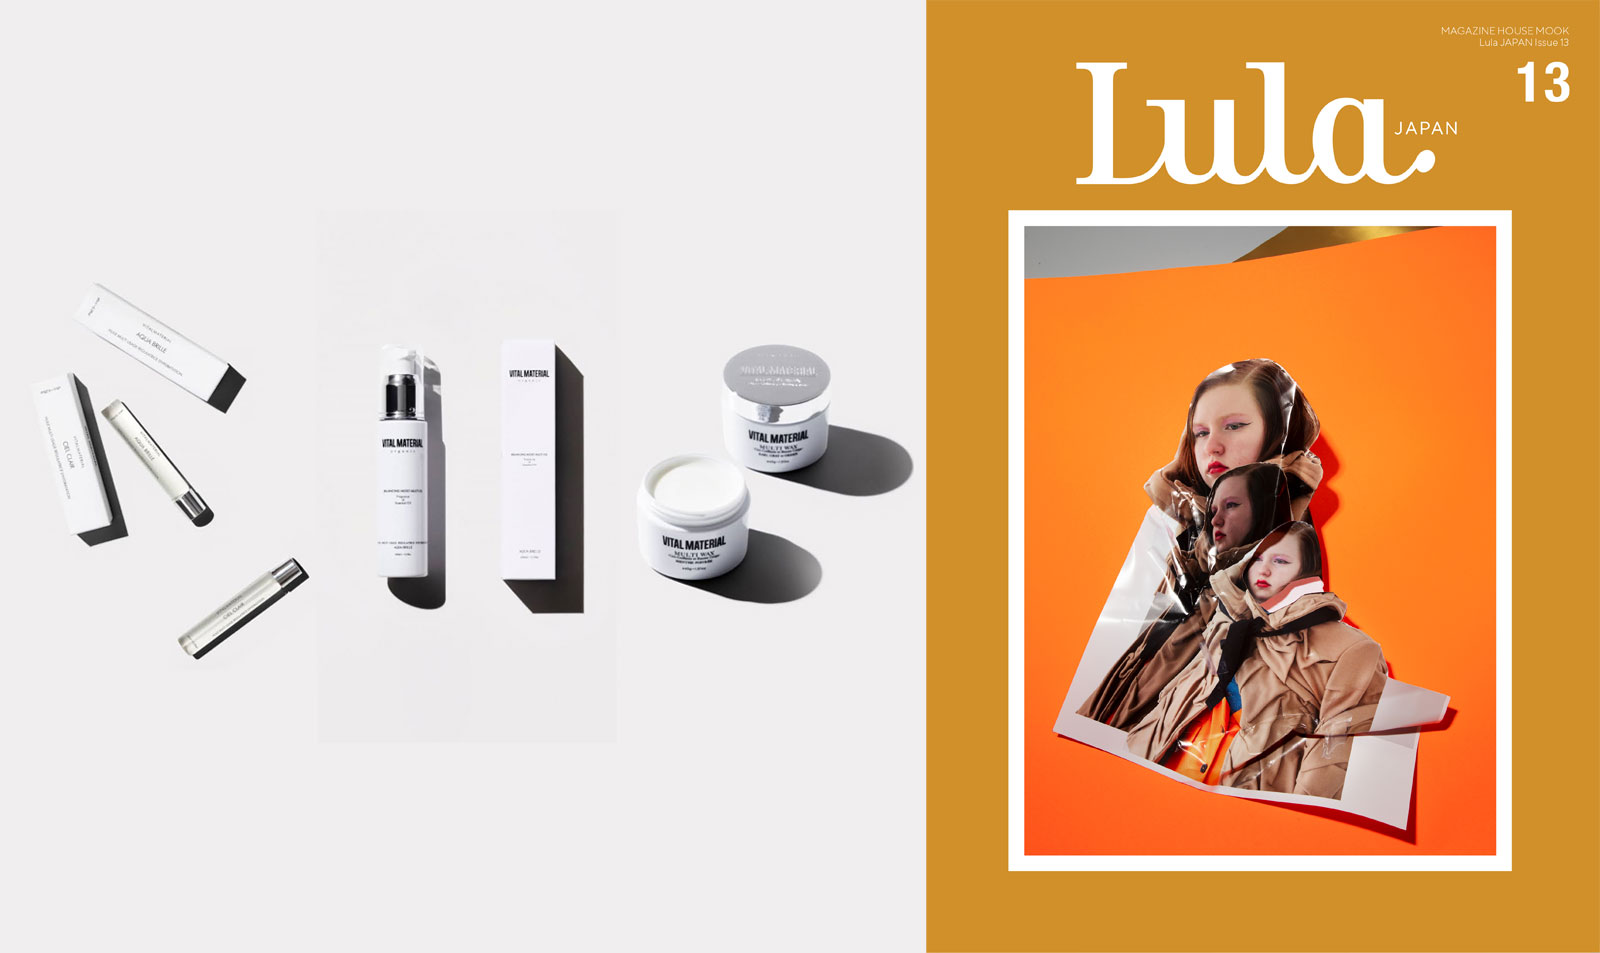 【SPECIAL】Subscription to Lula JAPAN